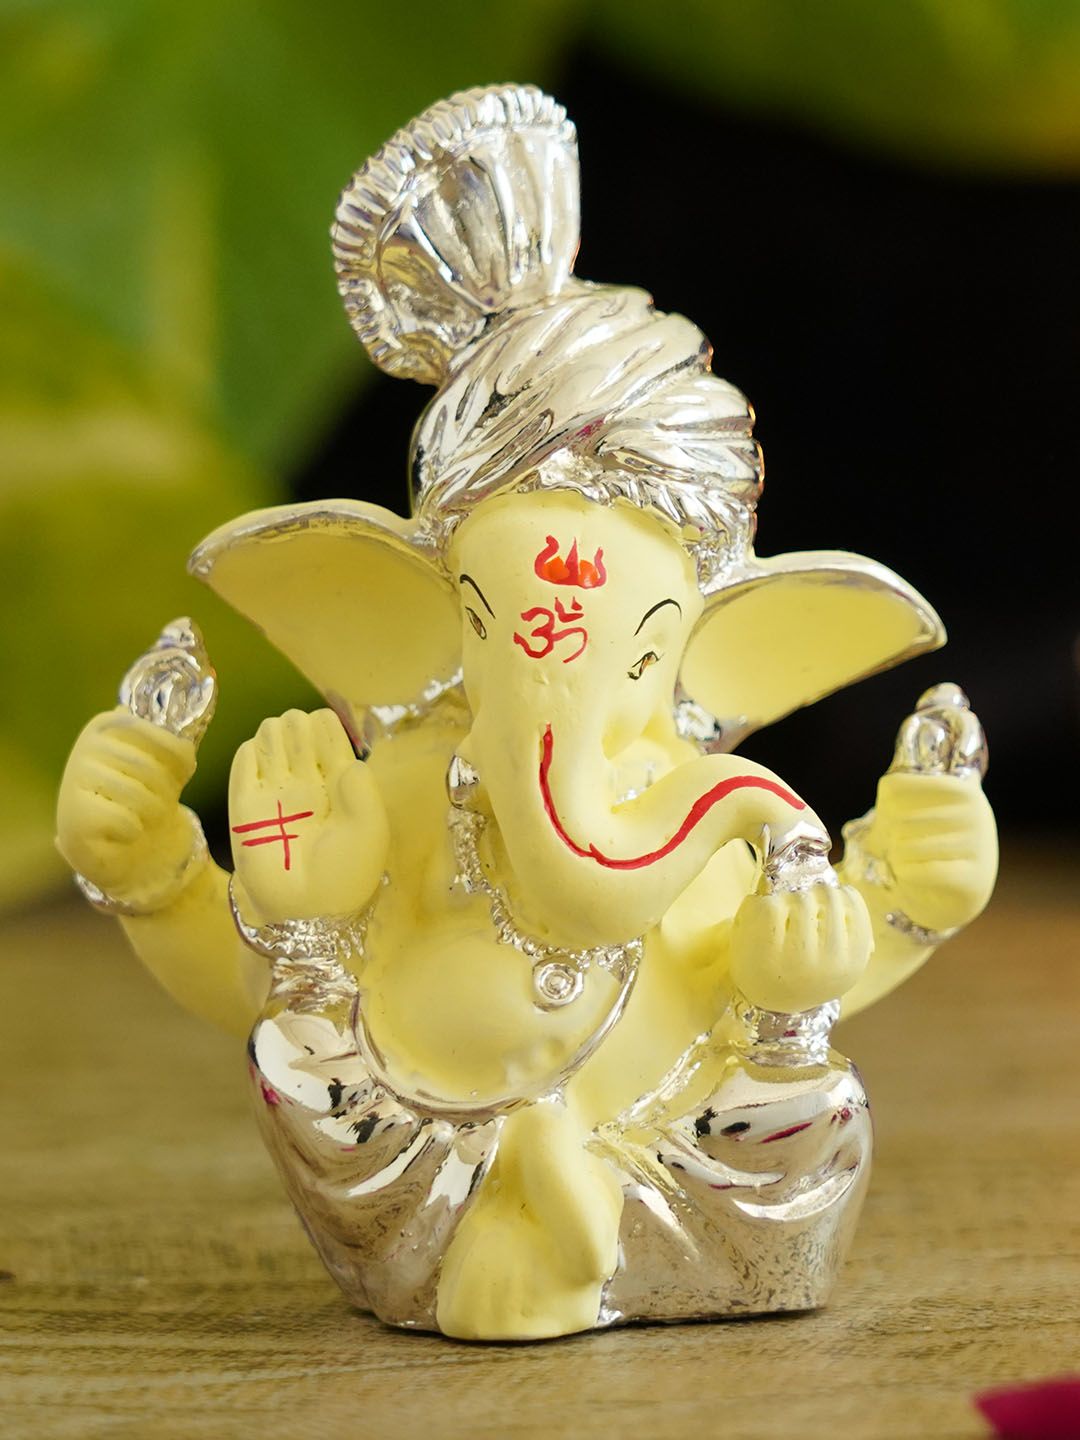 TIED RIBBONS Silver-Toned & Beige Lord Ganesha Idol Statue Diwali Decoration Showpiece Price in India